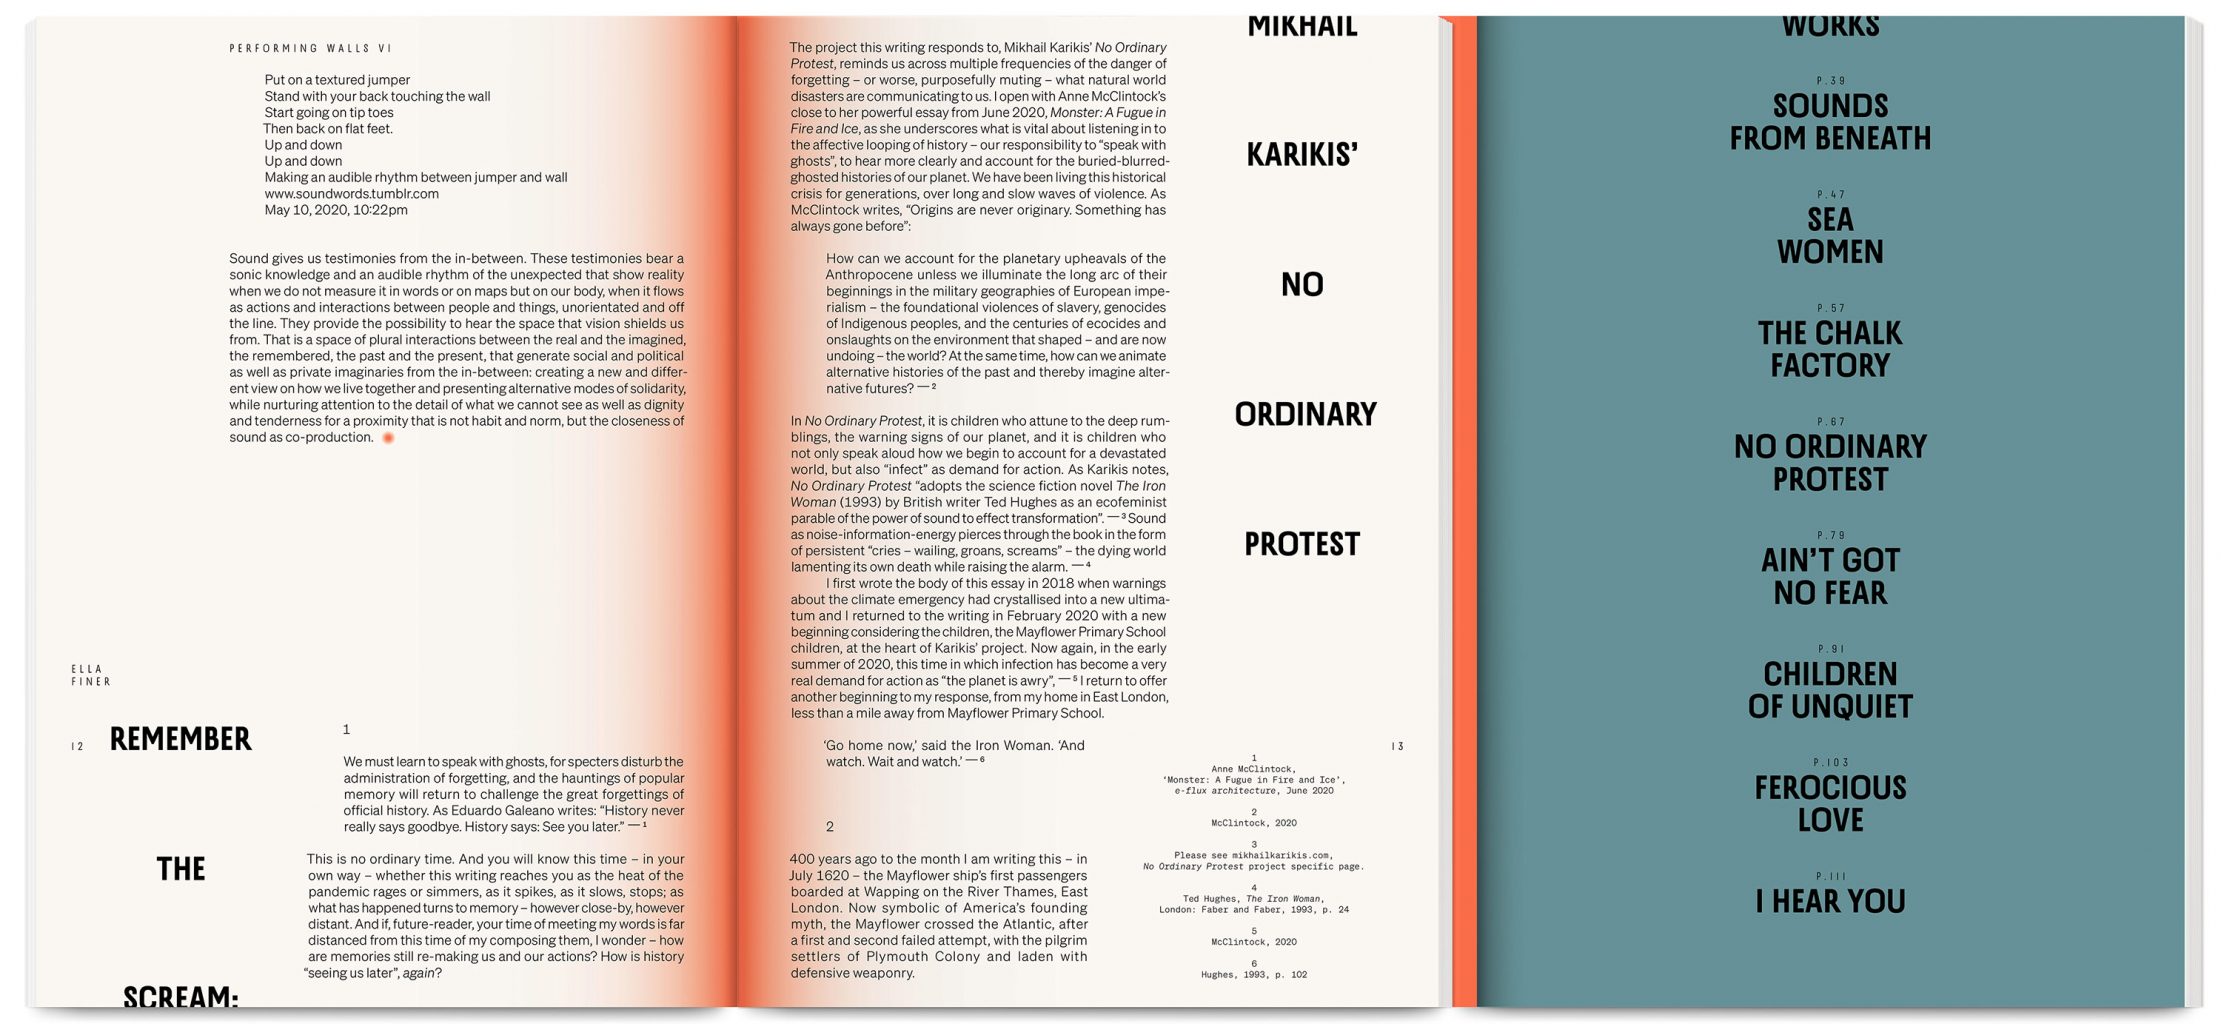 For Many Voices, Mikhail Karikis' monograph, designed by In the shade of a tree studio, founded by Sophie Demay and Maël Fournier Comte